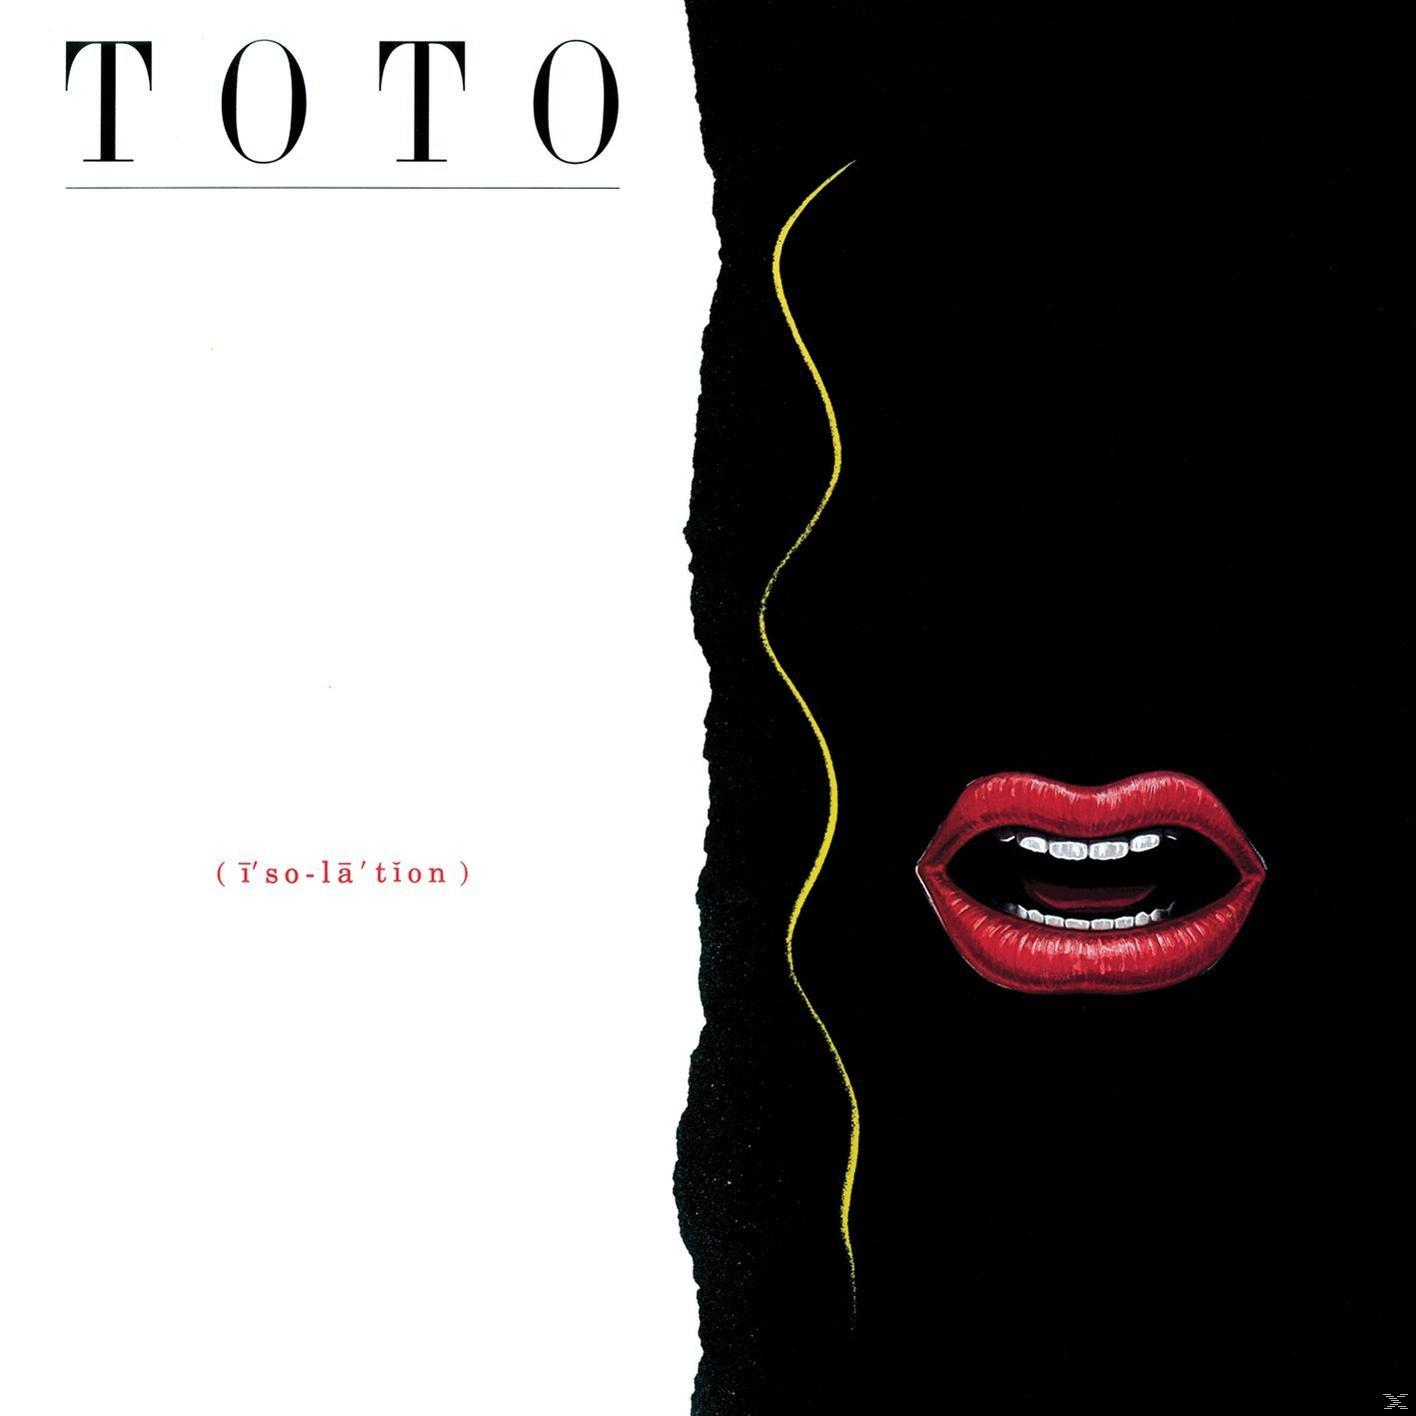 (CD) - Isolation (Lim.Collectors - Toto Edition)